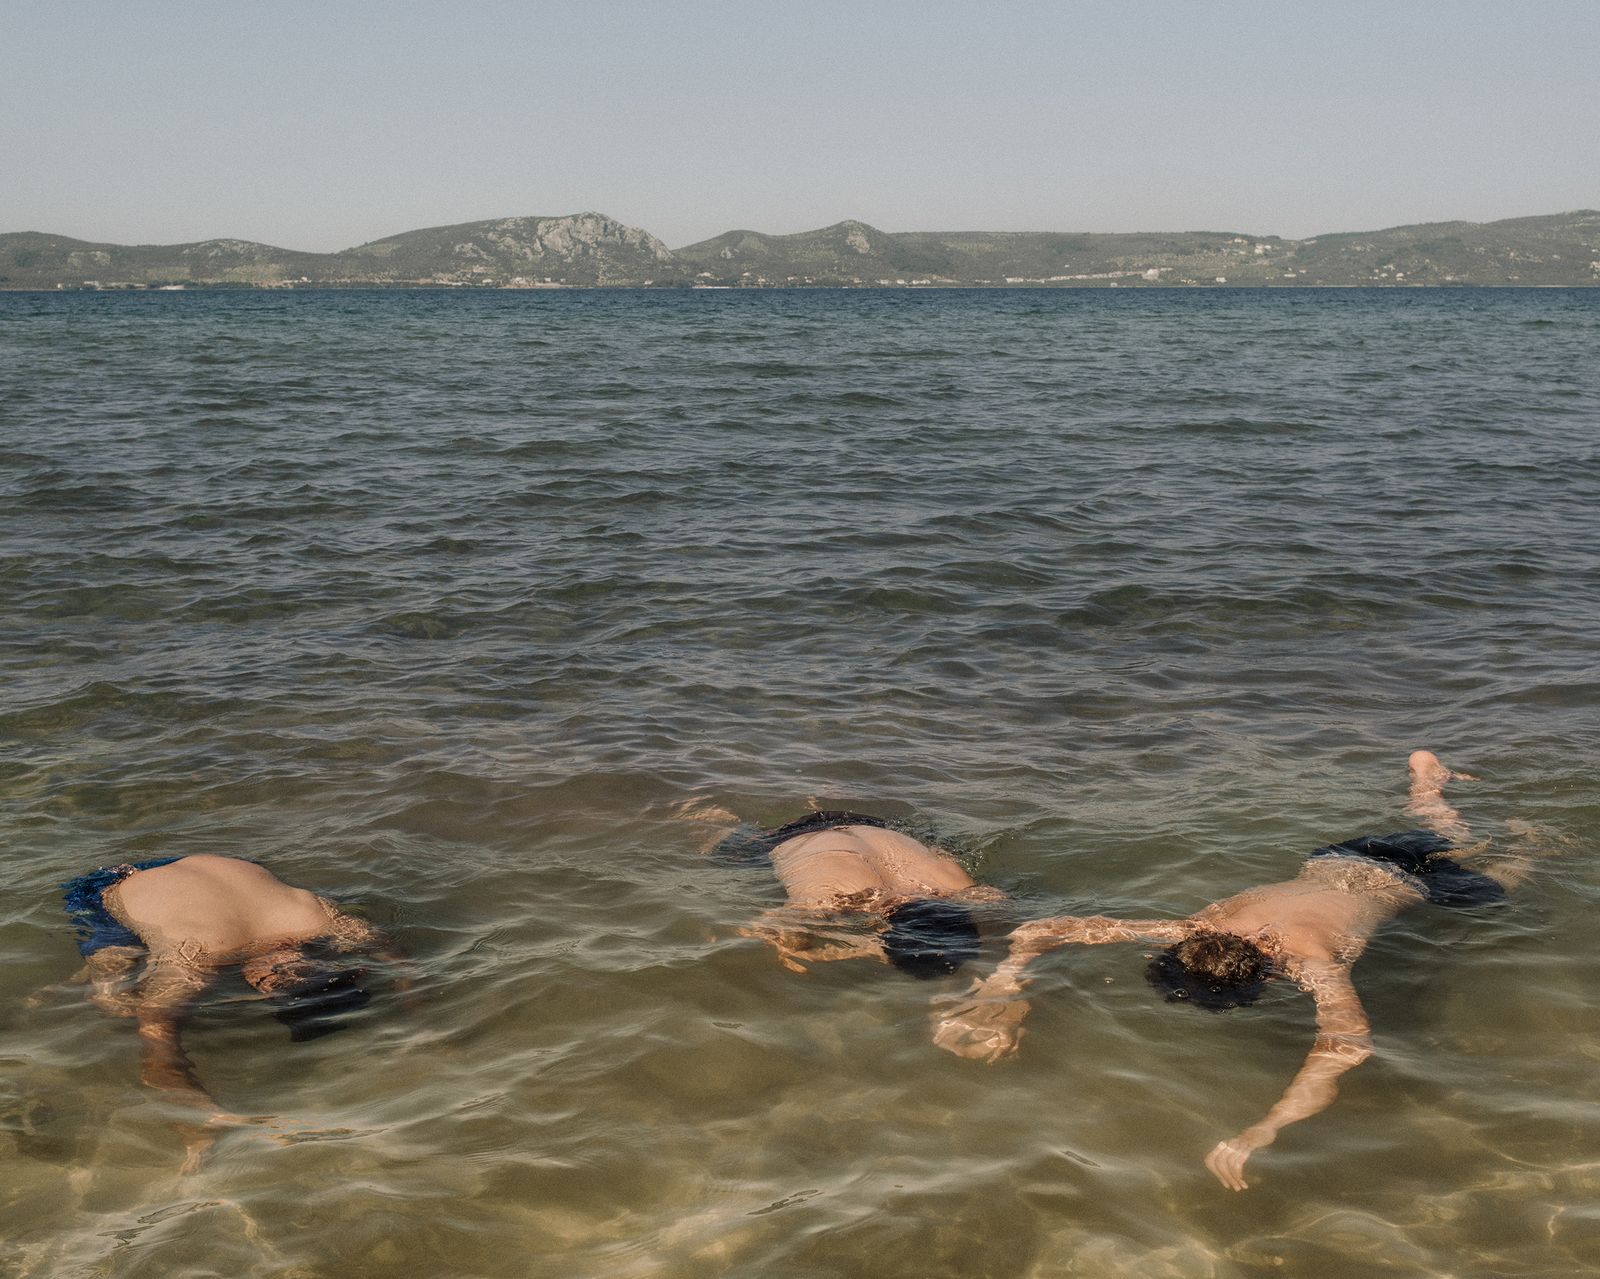 © Agathe Kalfas & Mathias Benguigui - Mamoon from Mosul in Iraq, Issa and Aziz from Damascus in Syria bathe in the Gulf of Gera. 2018.05.13